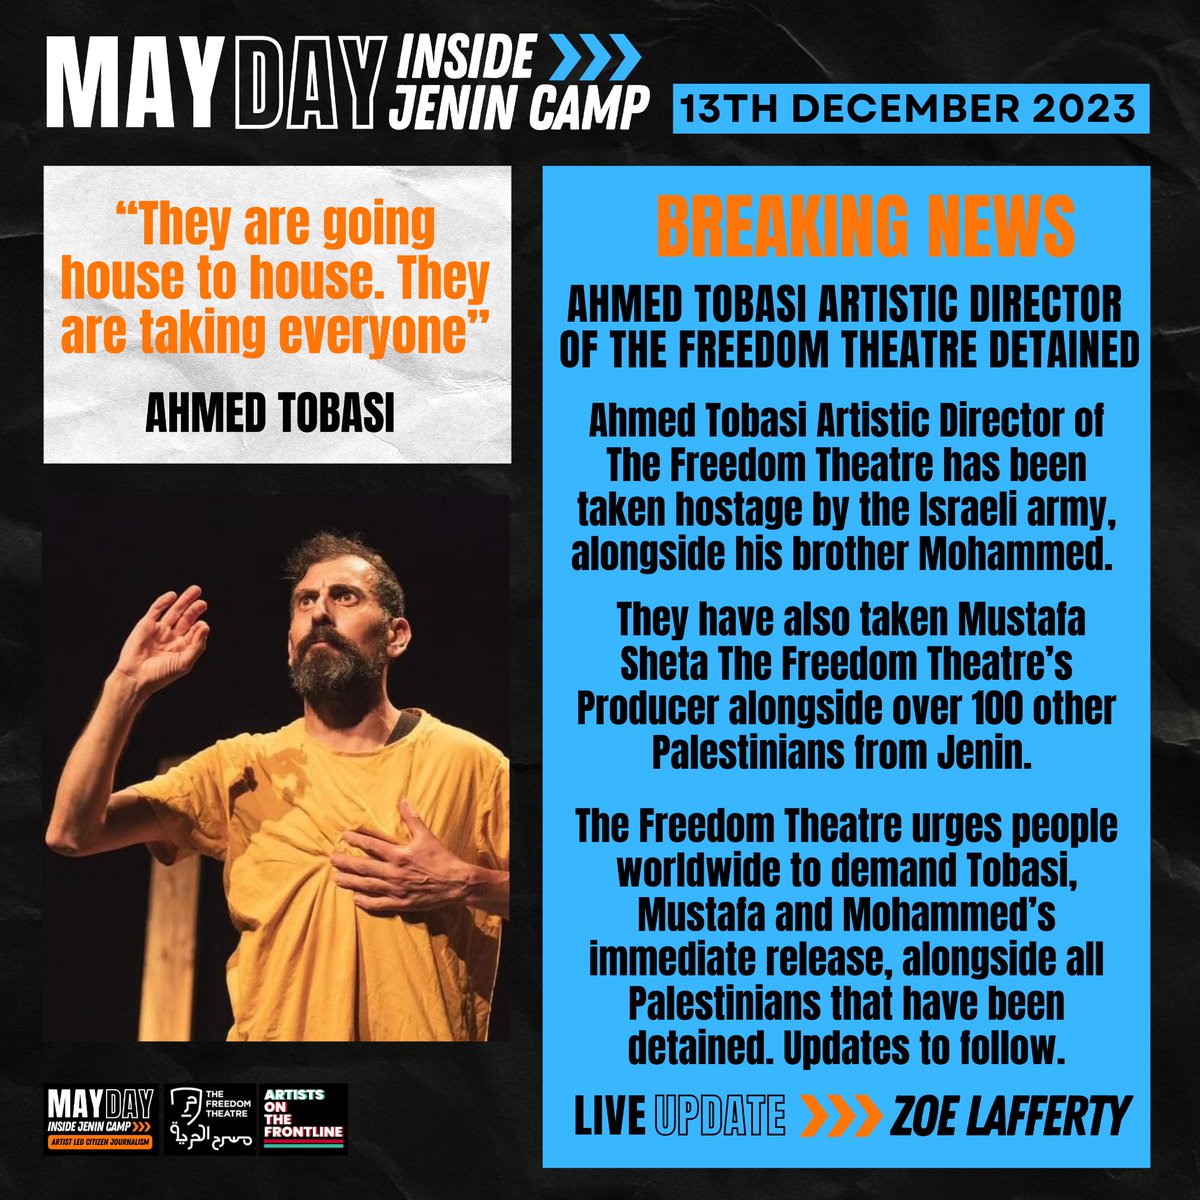 Artistic Director Ahmed Tobasi has also been taken by the Israeli Army alongside Mustafa Sheta We urge people worldwide to demand their release Updates to follow #Mayday Created by @freedom_theatre & @artistfrontline #Jenin #JeninUnderAttack #Palestine #Theatre #جنين